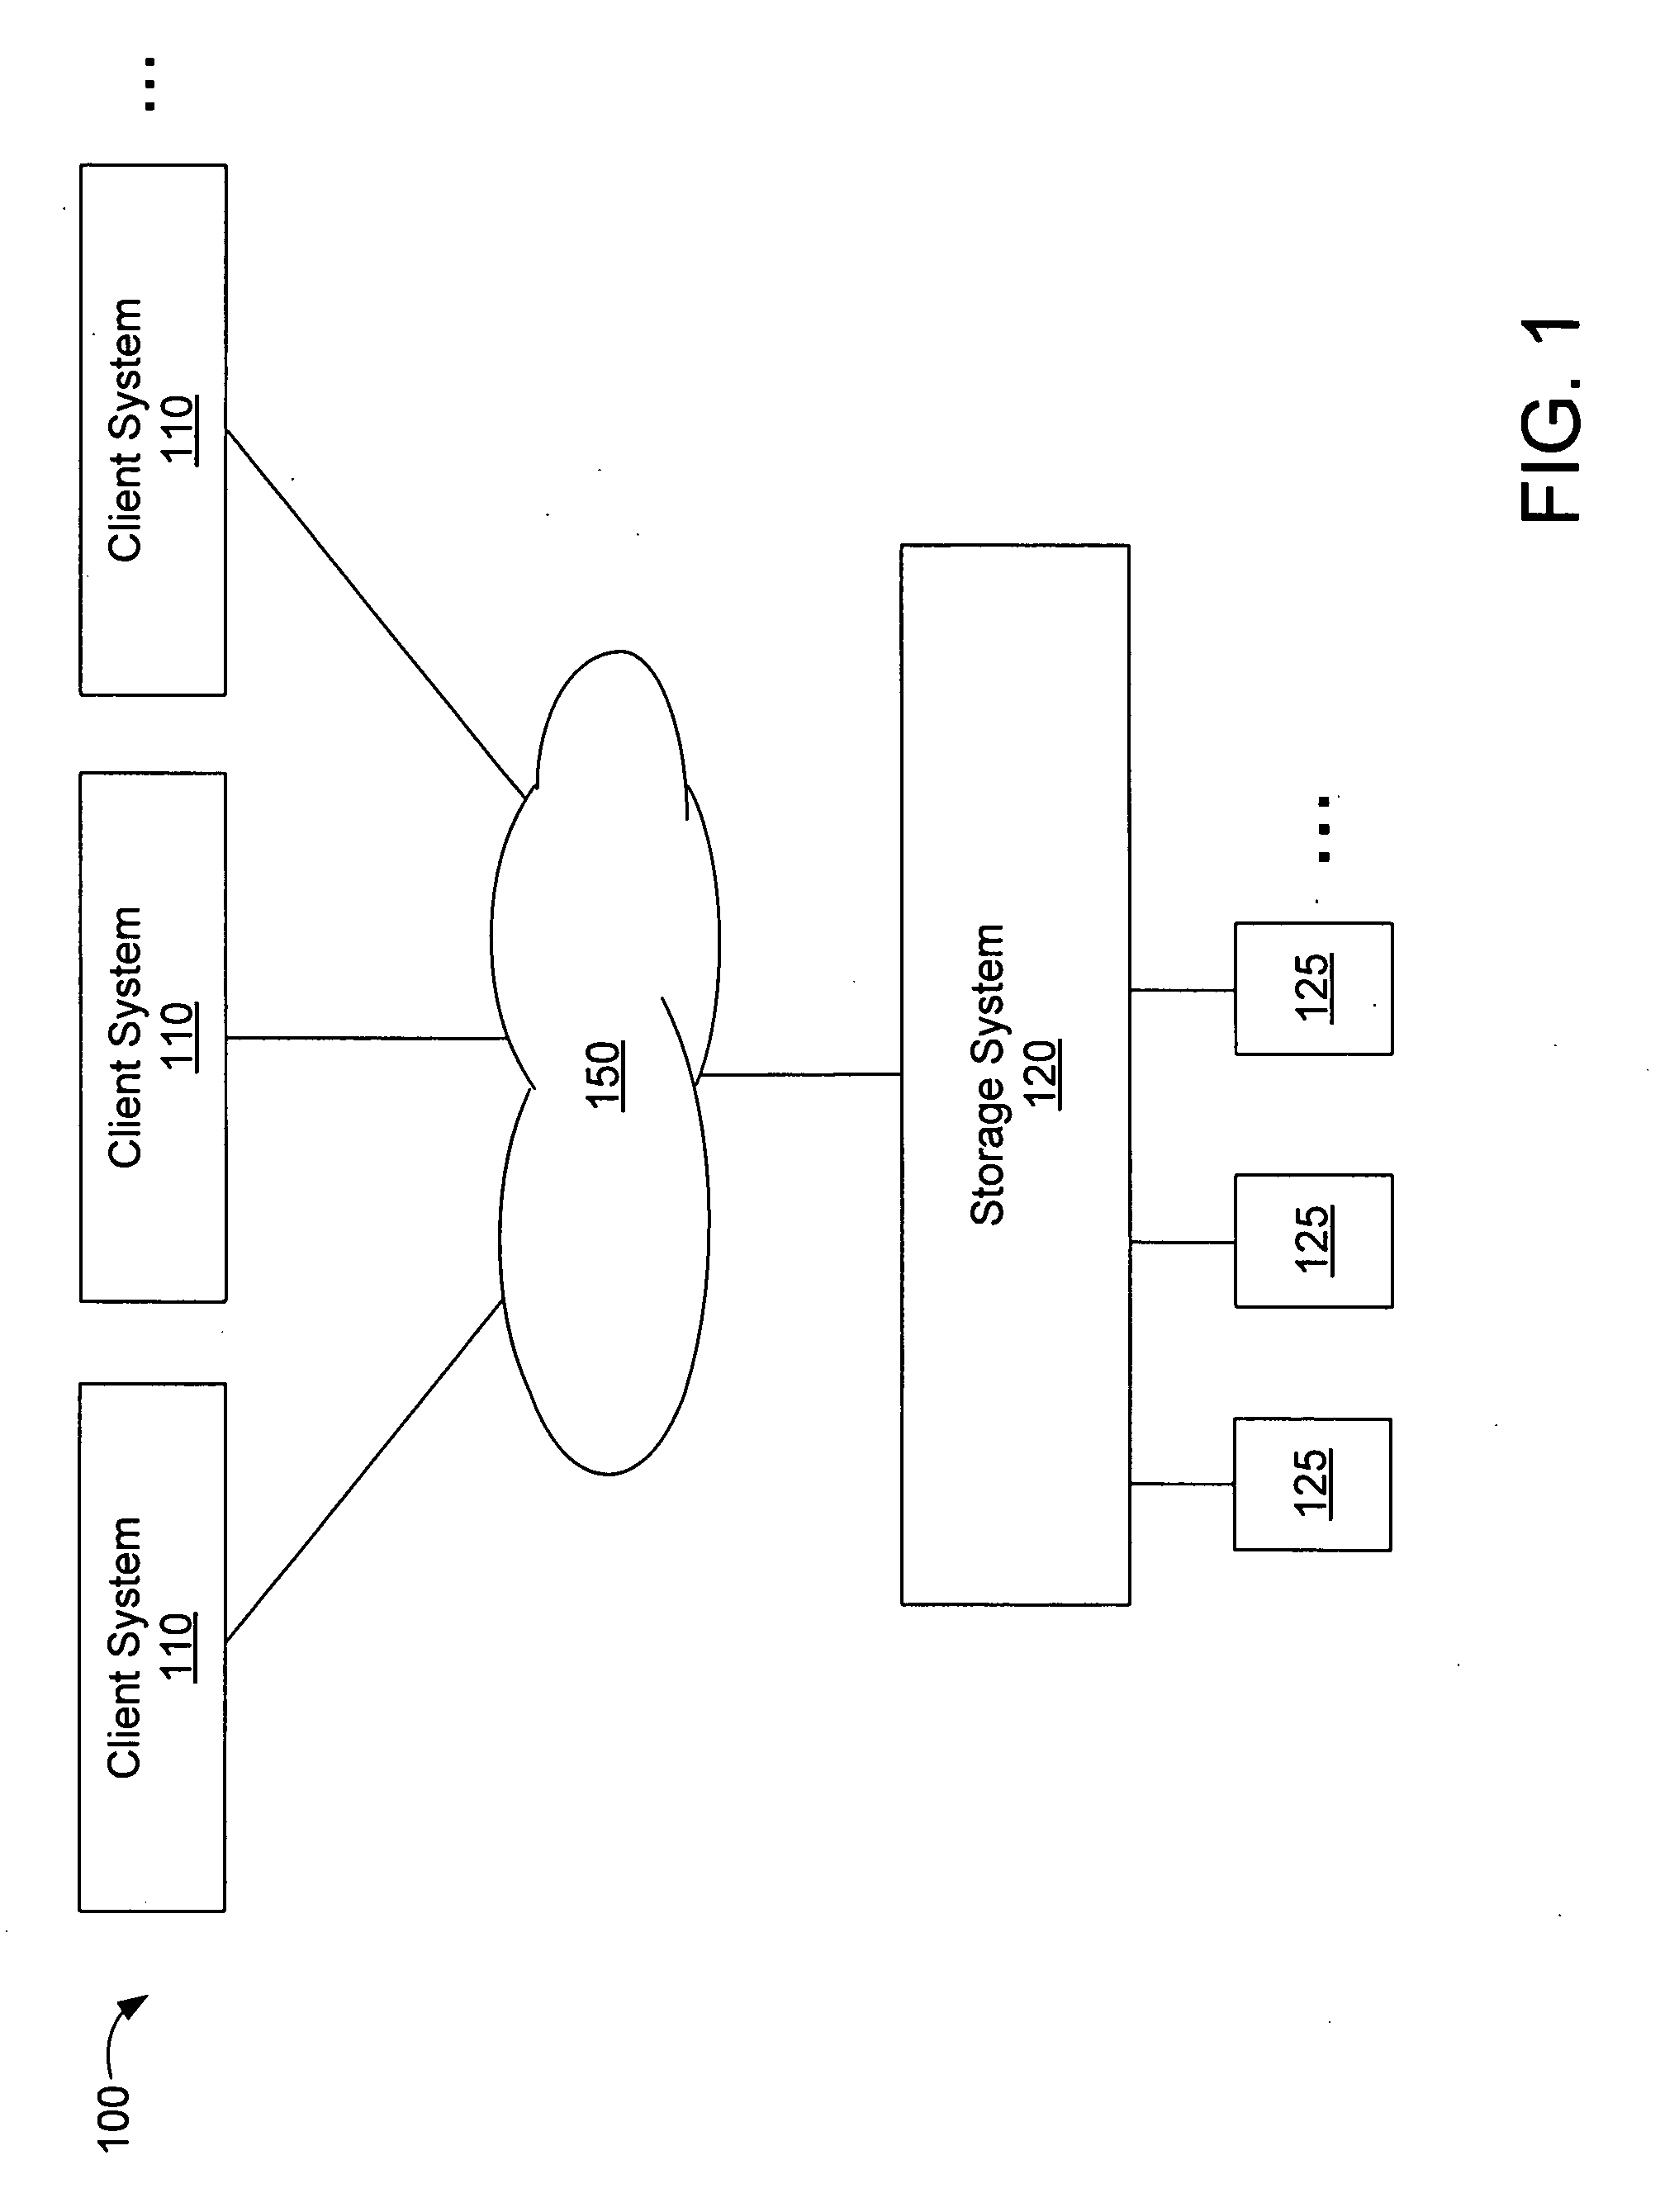 Remapping of Data Addresses for a Large Capacity Victim Cache